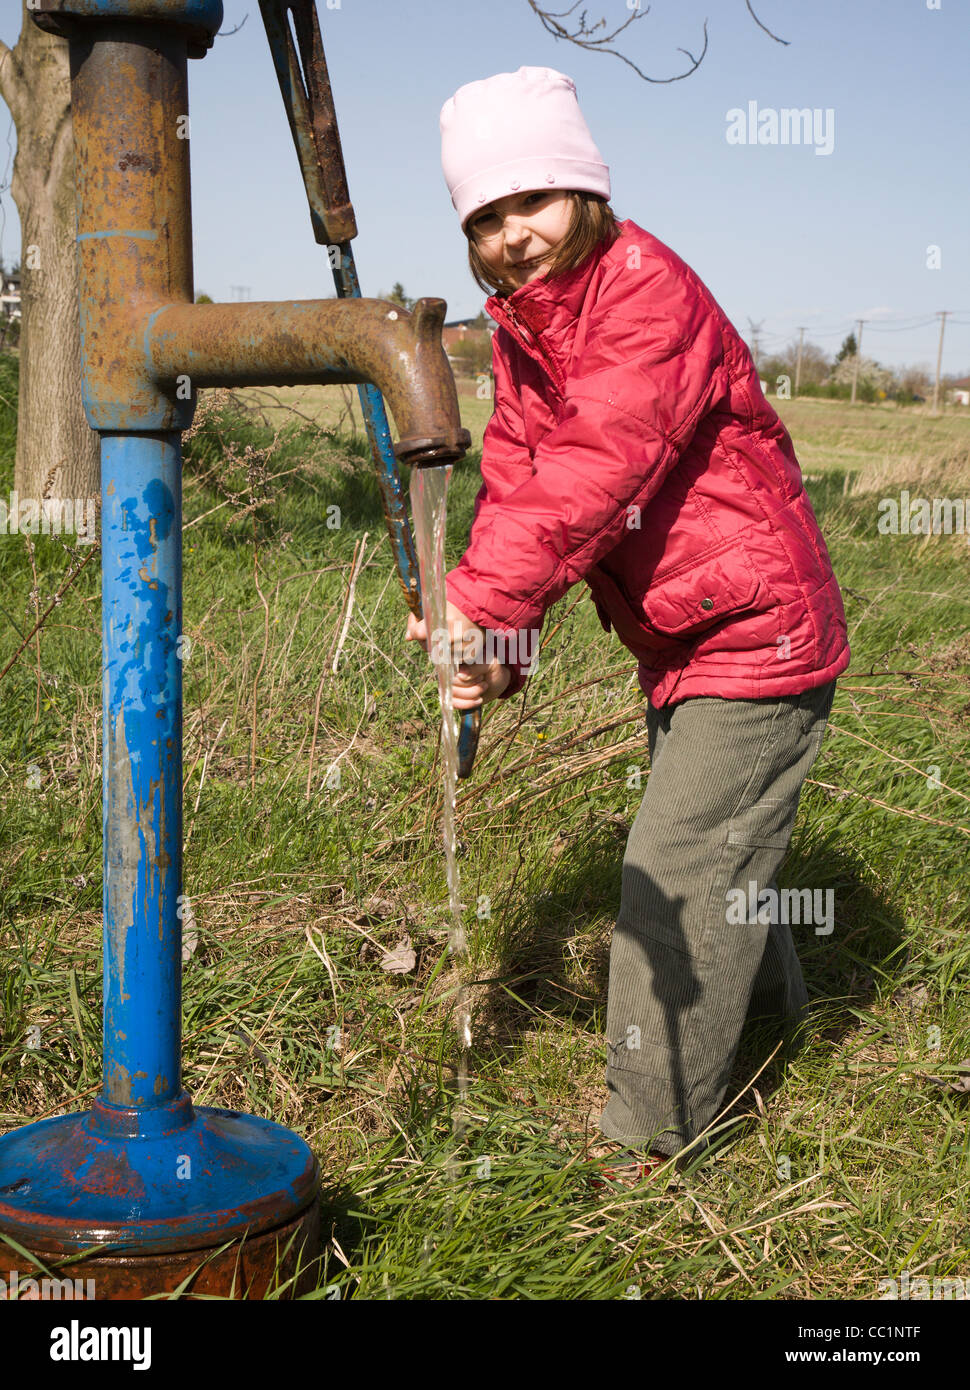 little girl and old water pump Stock Photo